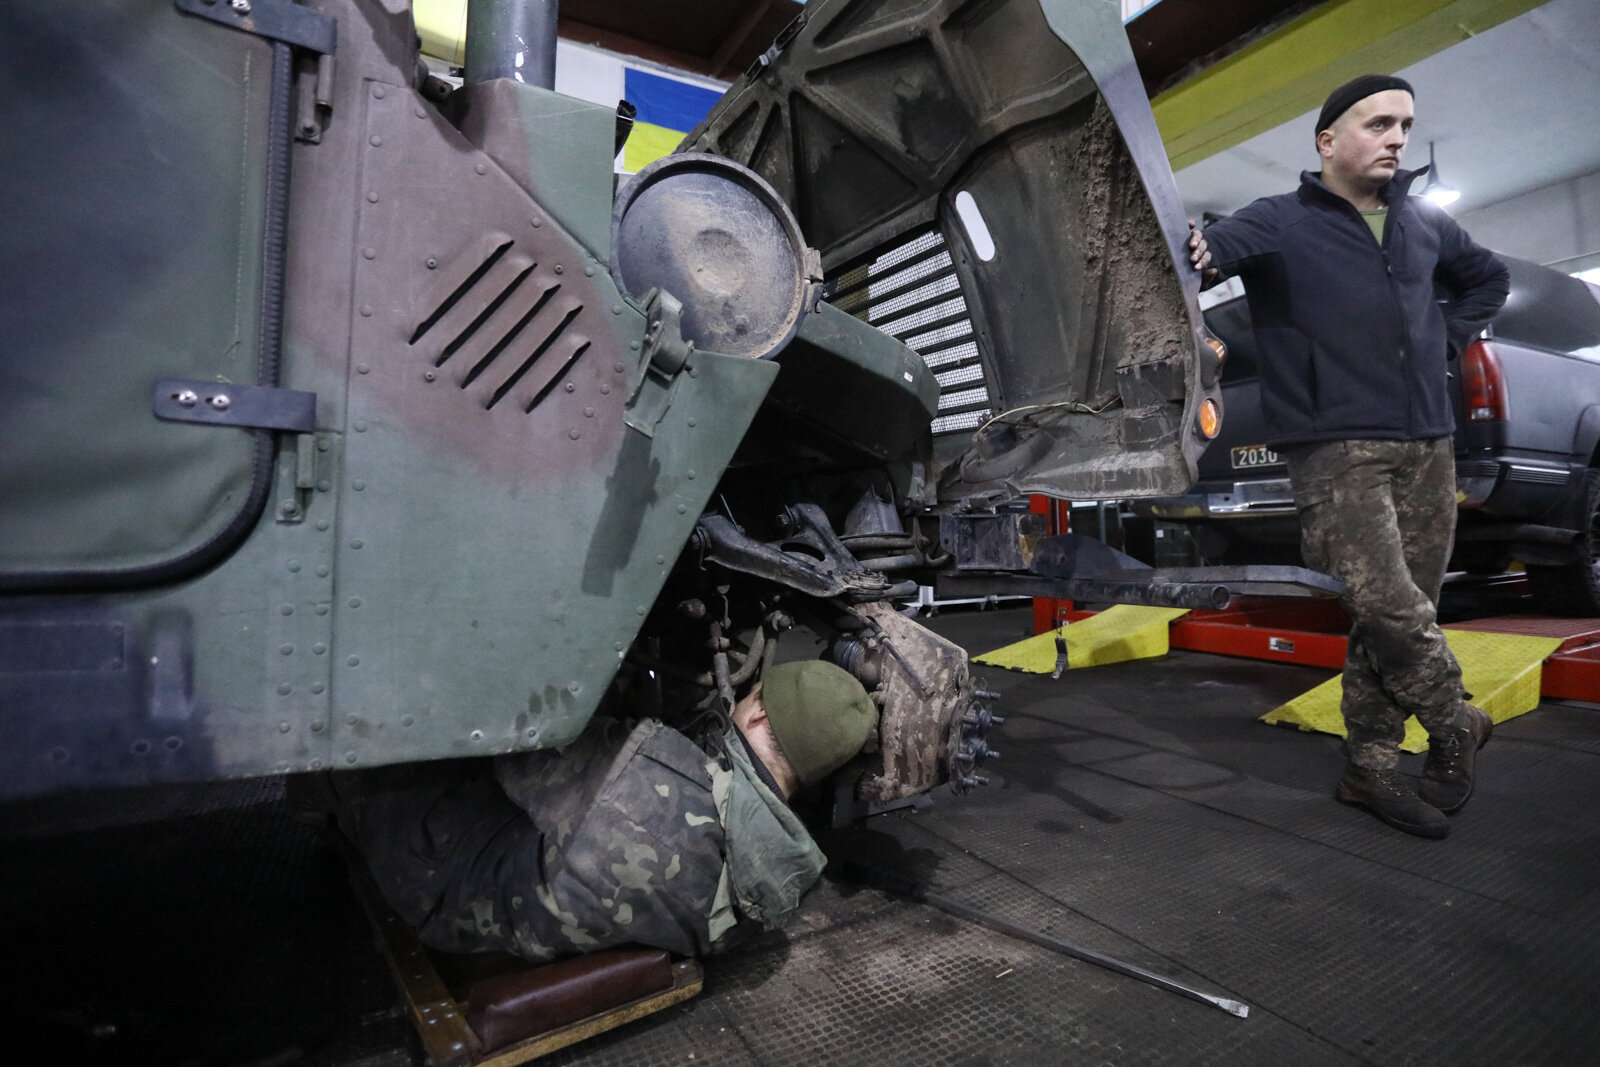 Technicians repair a Humvee vehicle at a Ukrainian army&#8217;s maintenance and overhaul workshop in the city of Zhytomyr on Nov. 20, 2020.